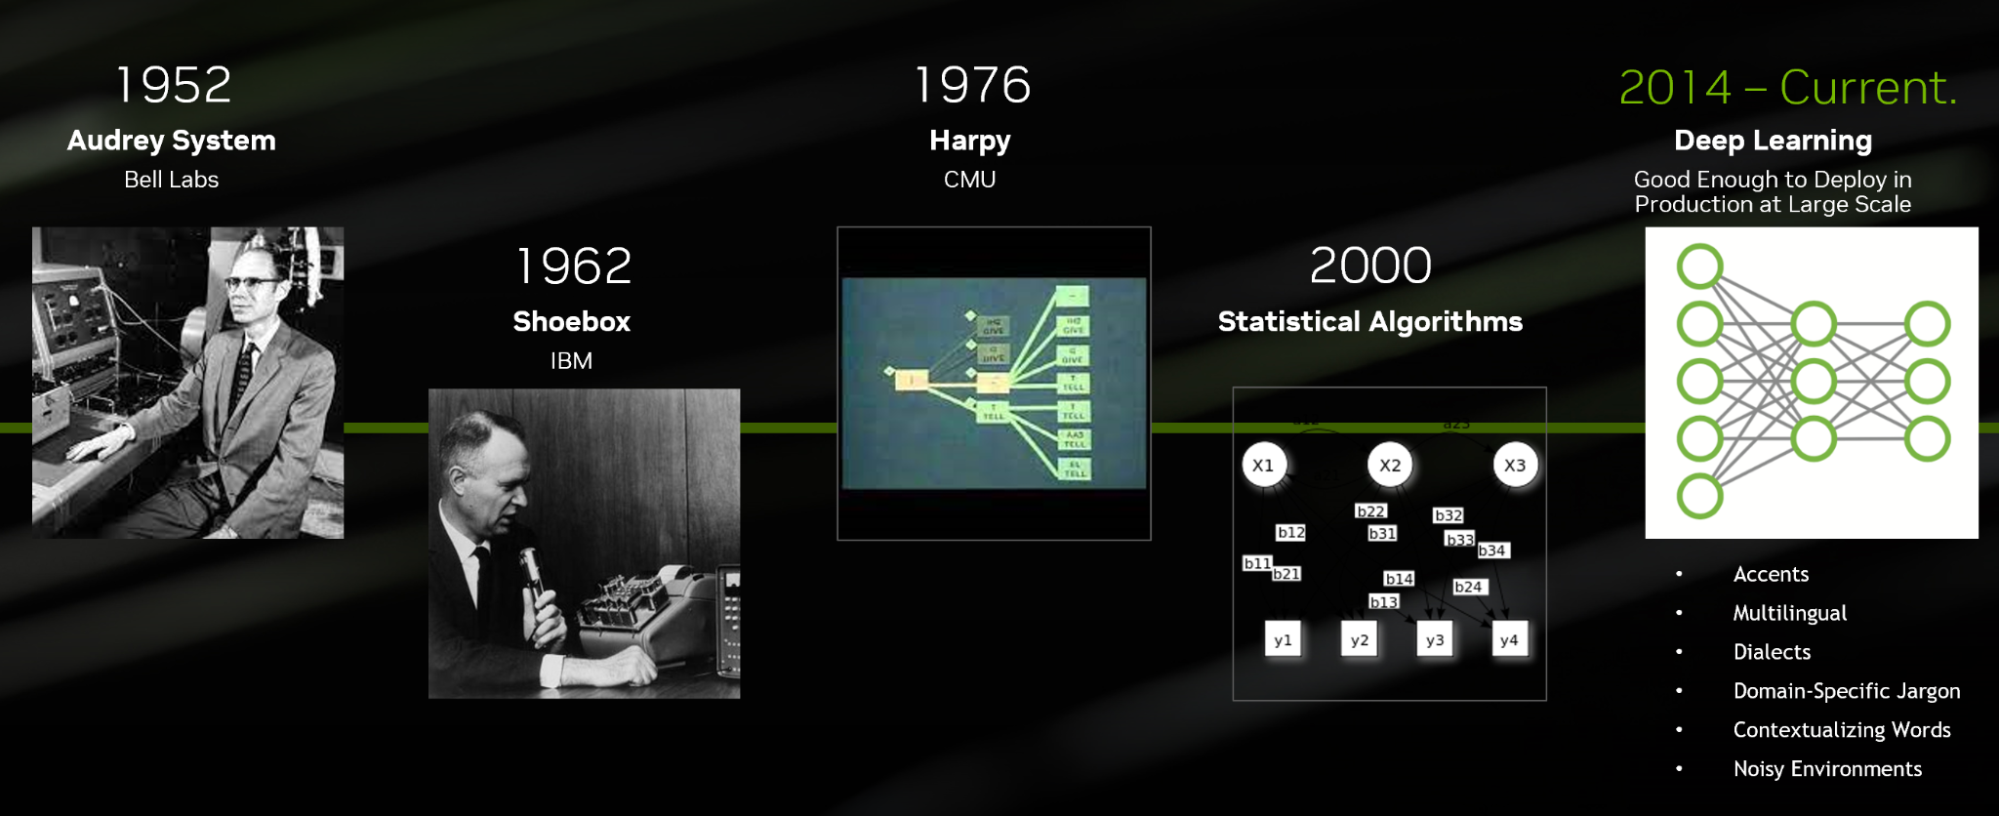 Infographic showing various automatic speech recognition milestones and inventions from 1952 to the present-day.